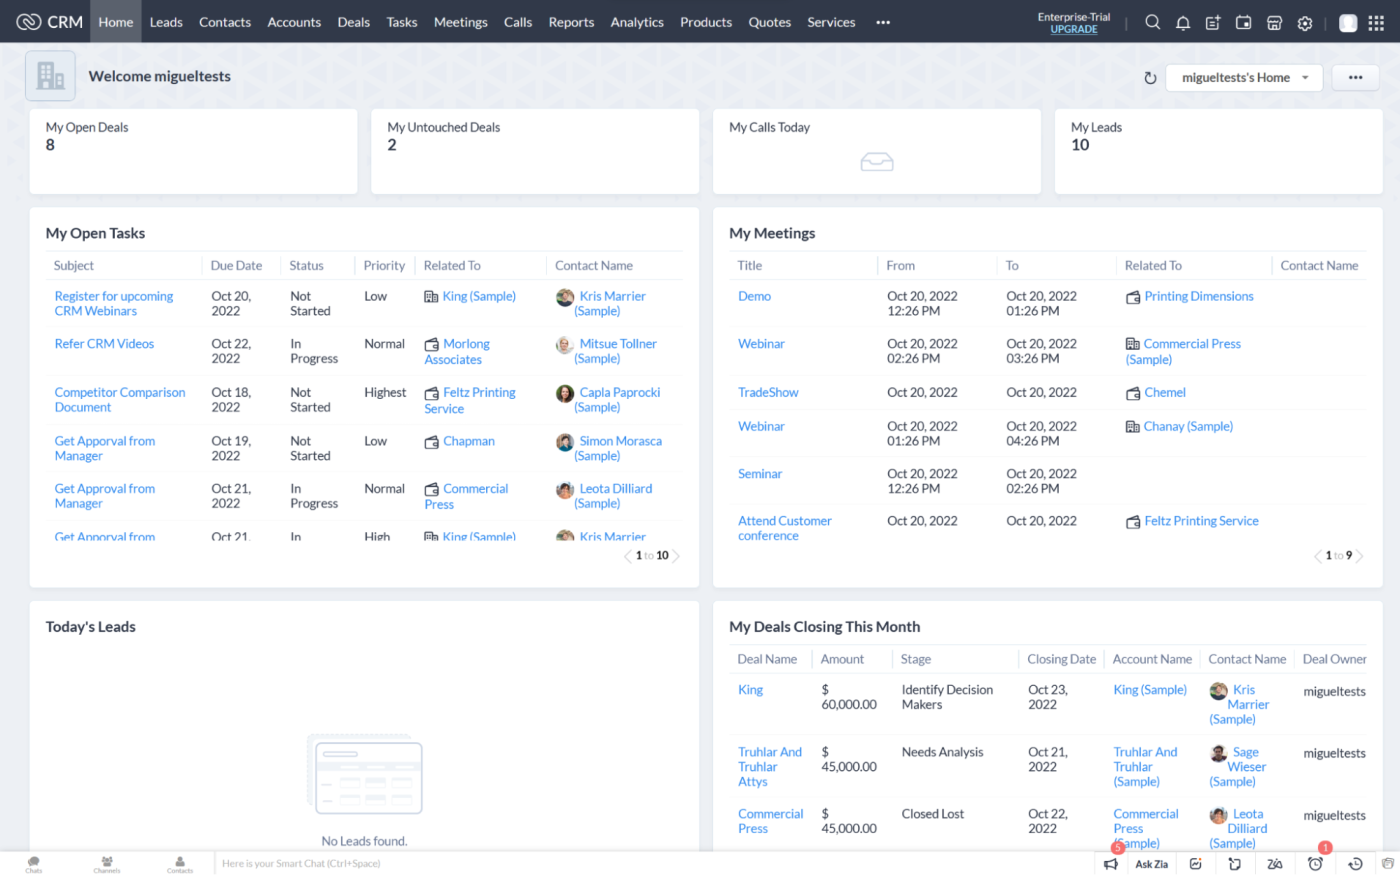 A screenshot of Zoho CRM, our pick for the best free CRM software for scaling your business